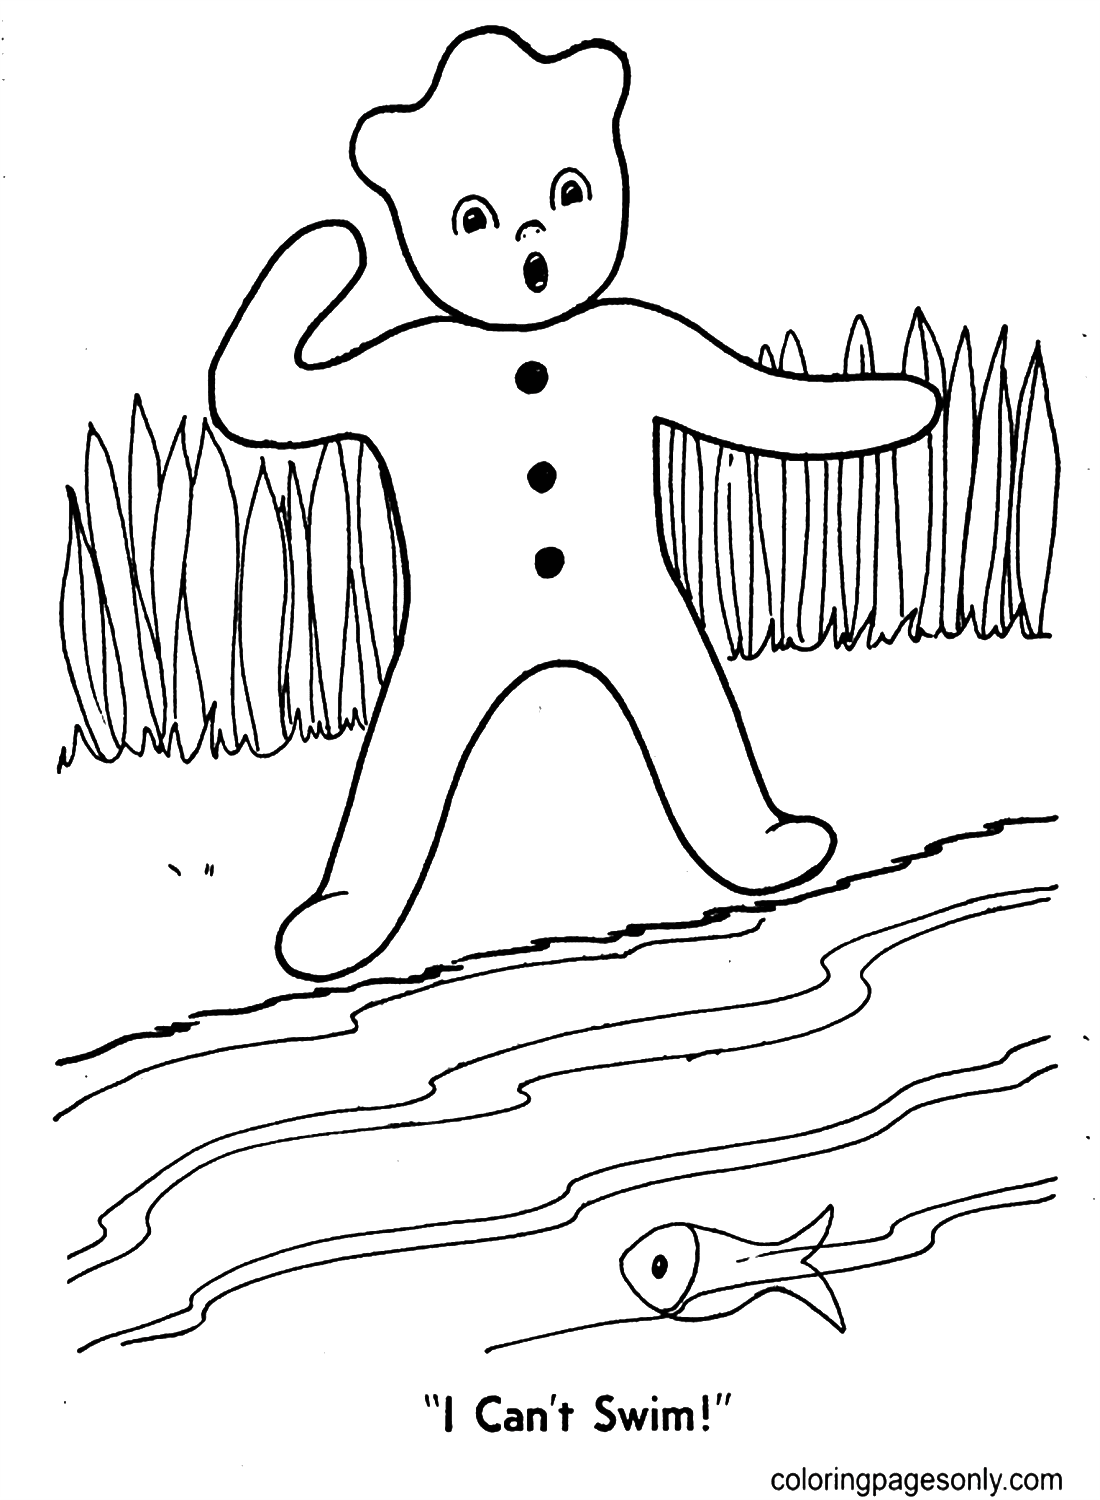 Can’t Swim Gingerbread Man Coloring Pages